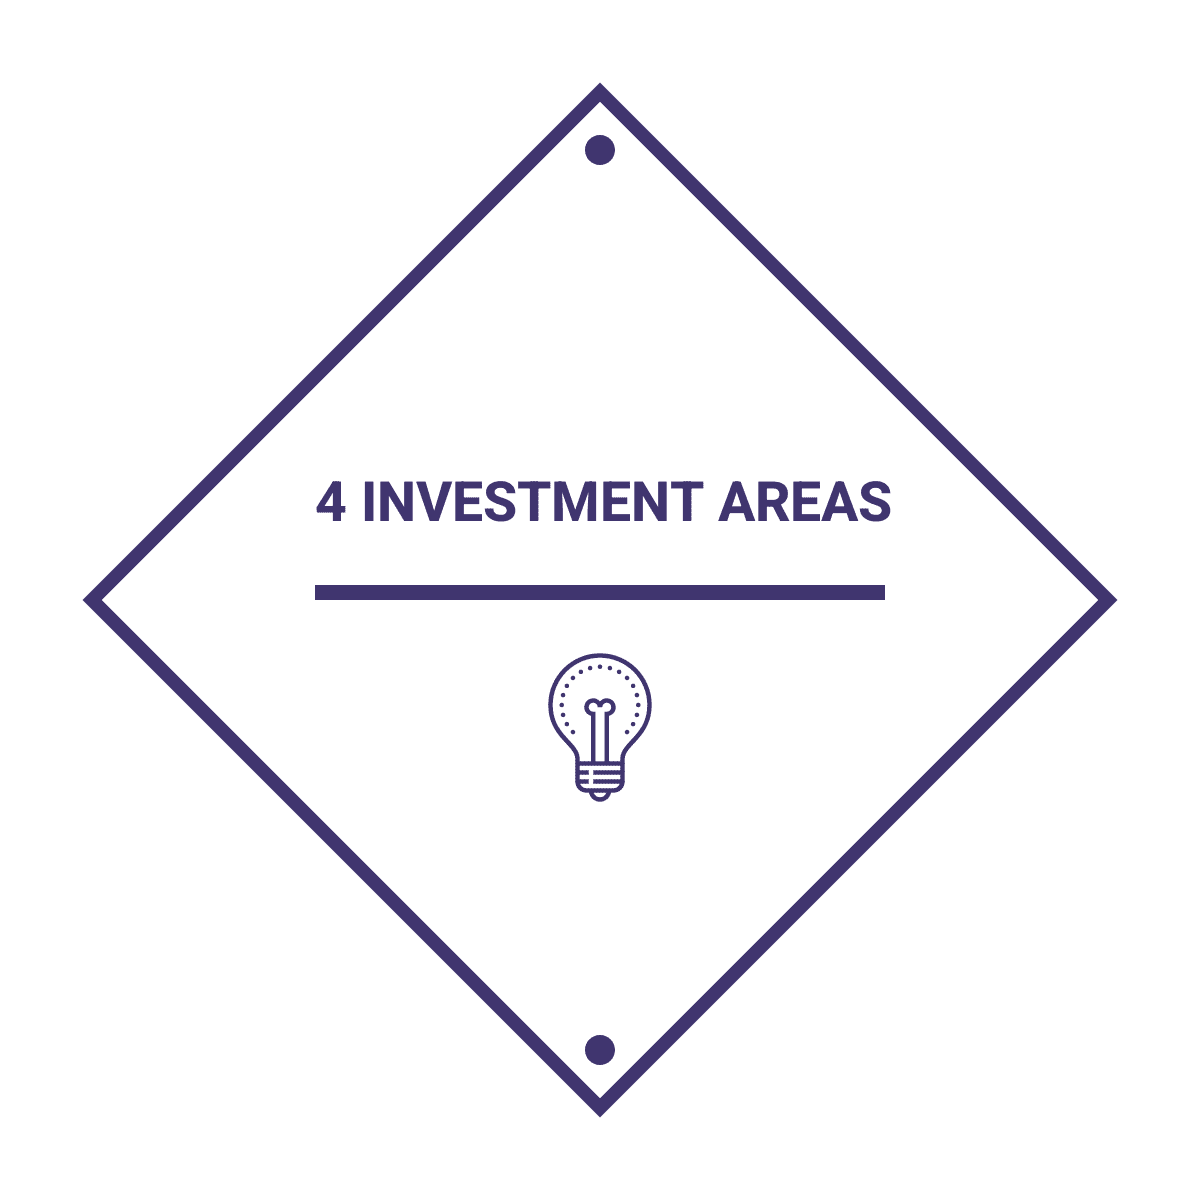 4 investment areas